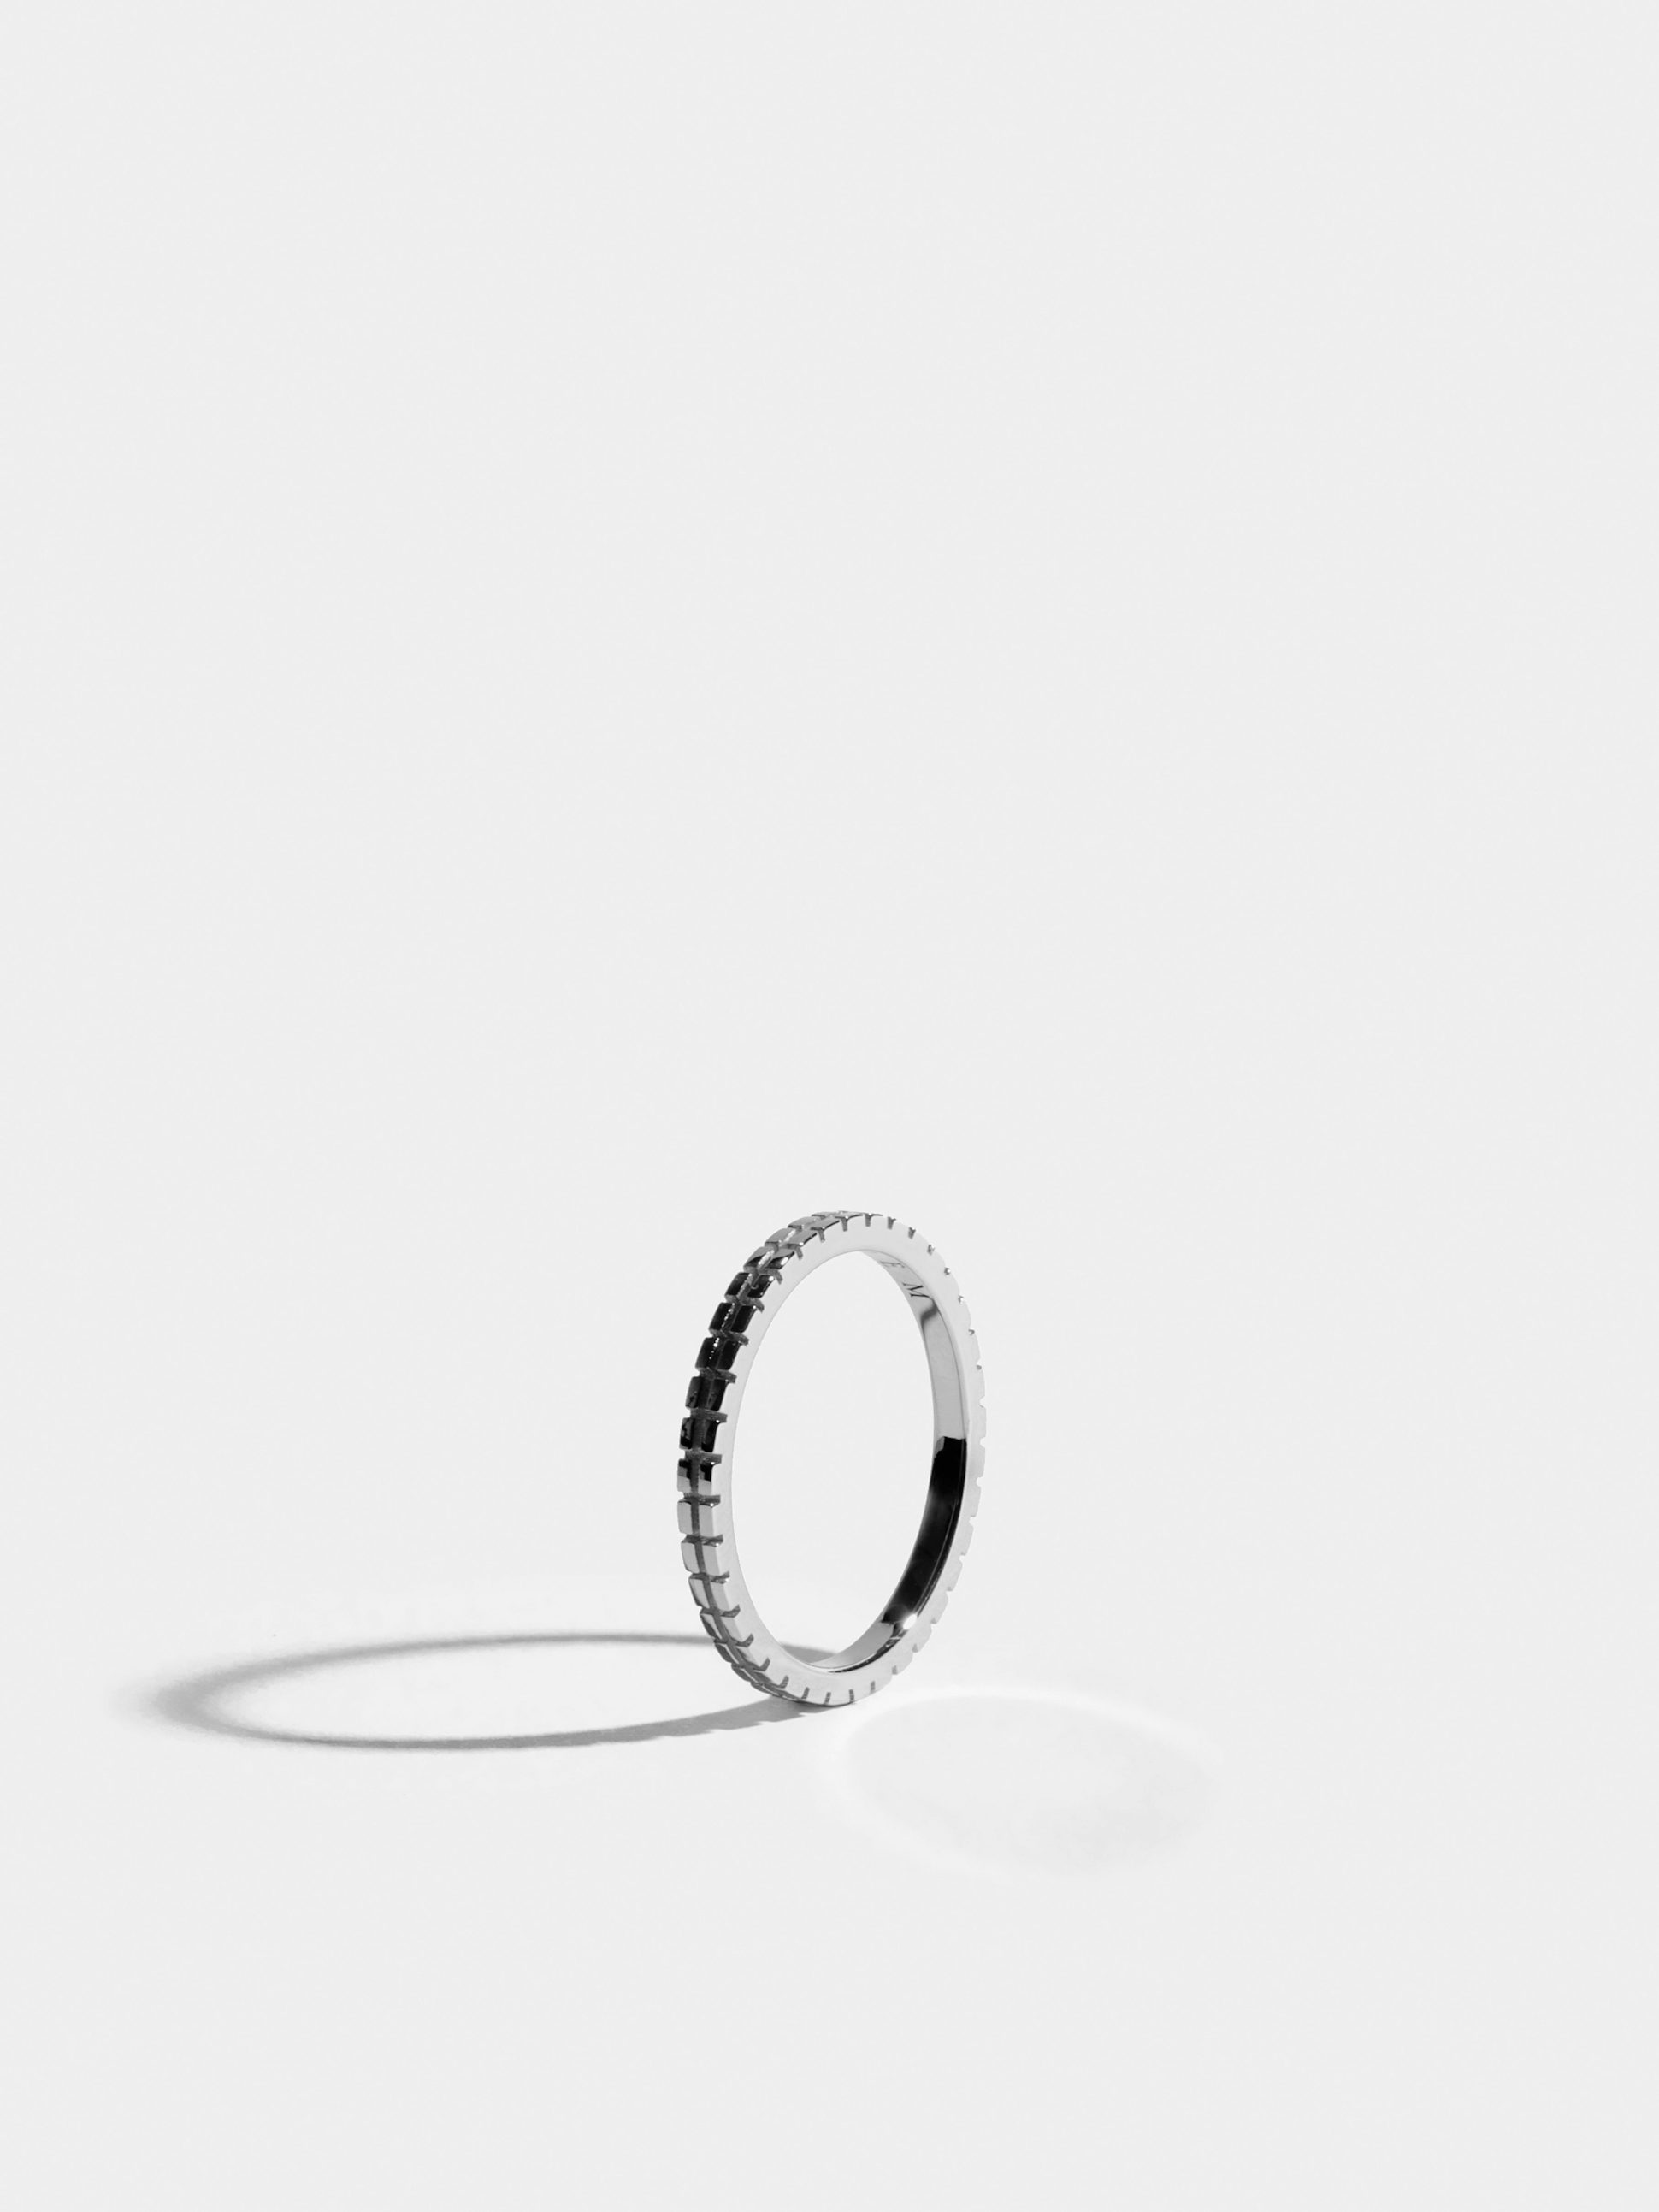 Anagramme "damier" ring in 18k Fairmined ethical white gold